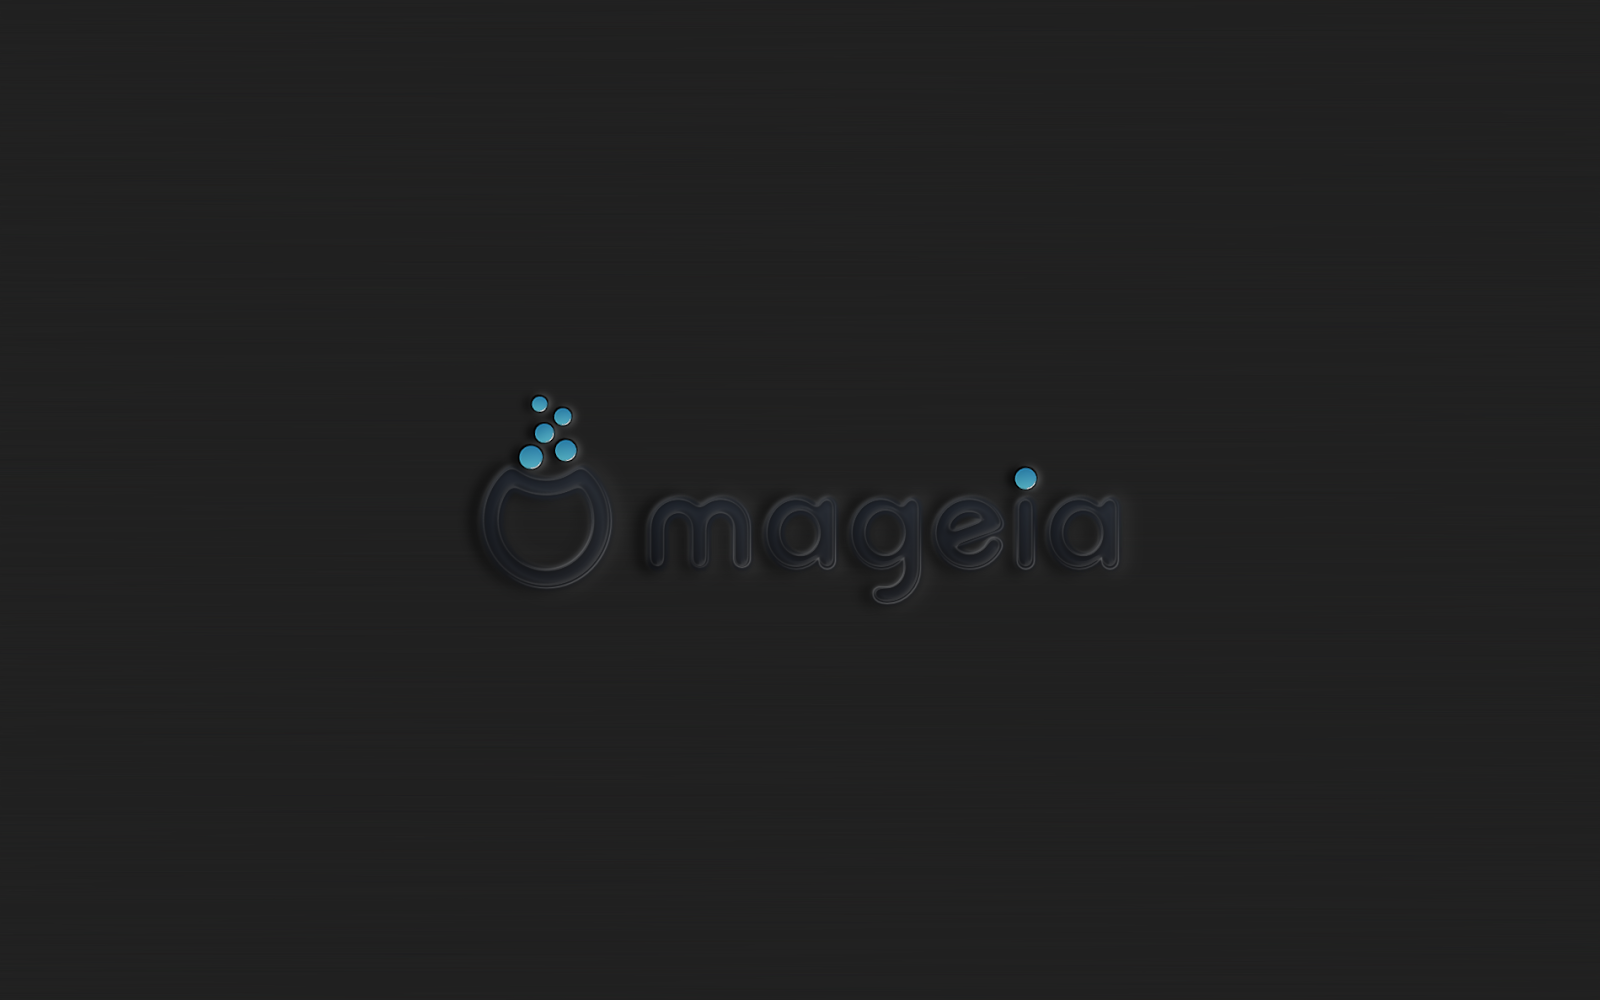 Linux Wallpaper Mageia